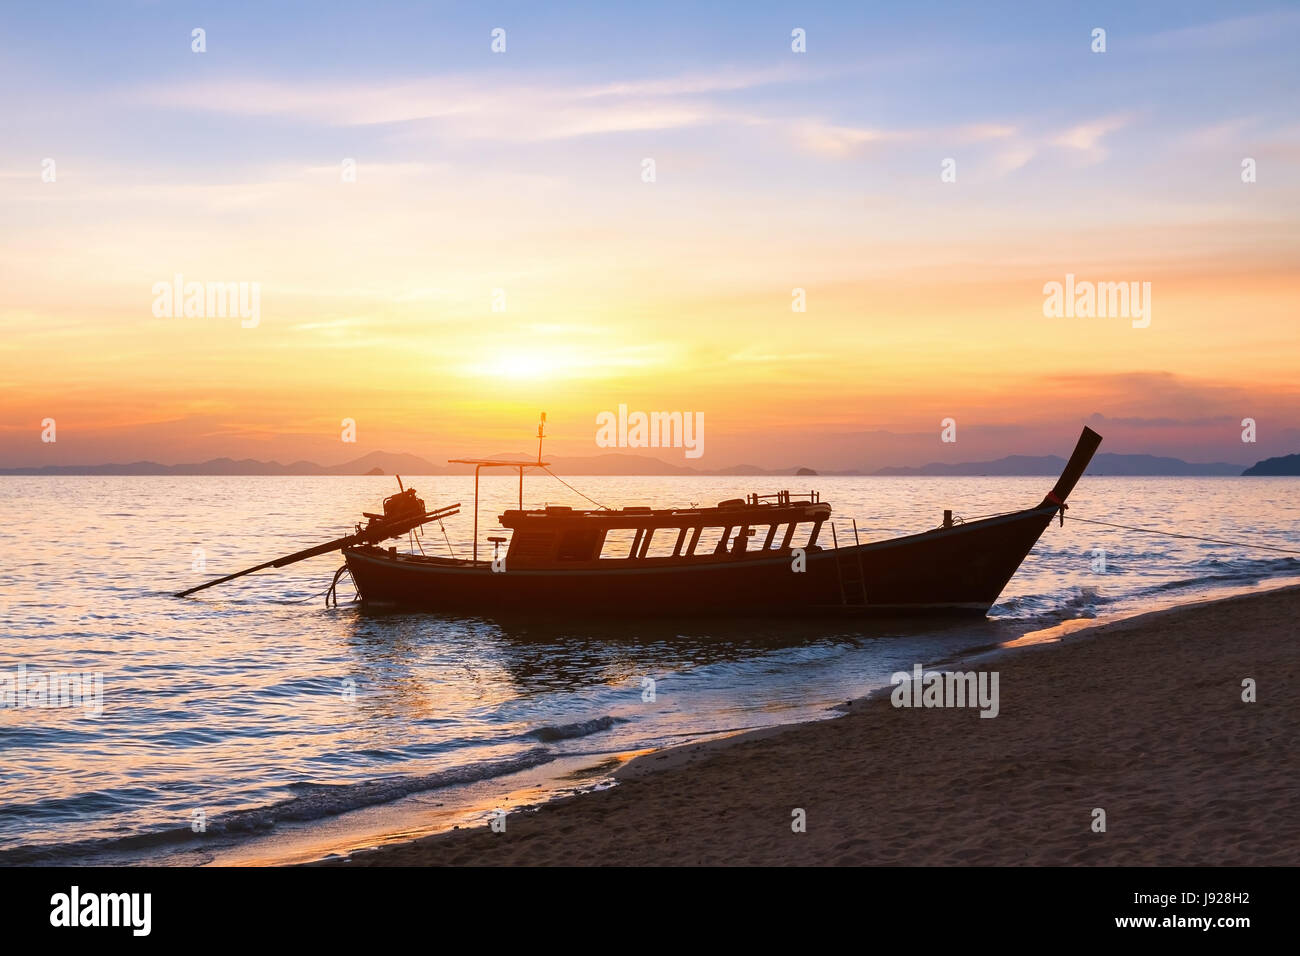 Silhouette of a traditional long-tail boat used to transport tourists at the beach at sunset, Krabi, Thailand Stock Photo